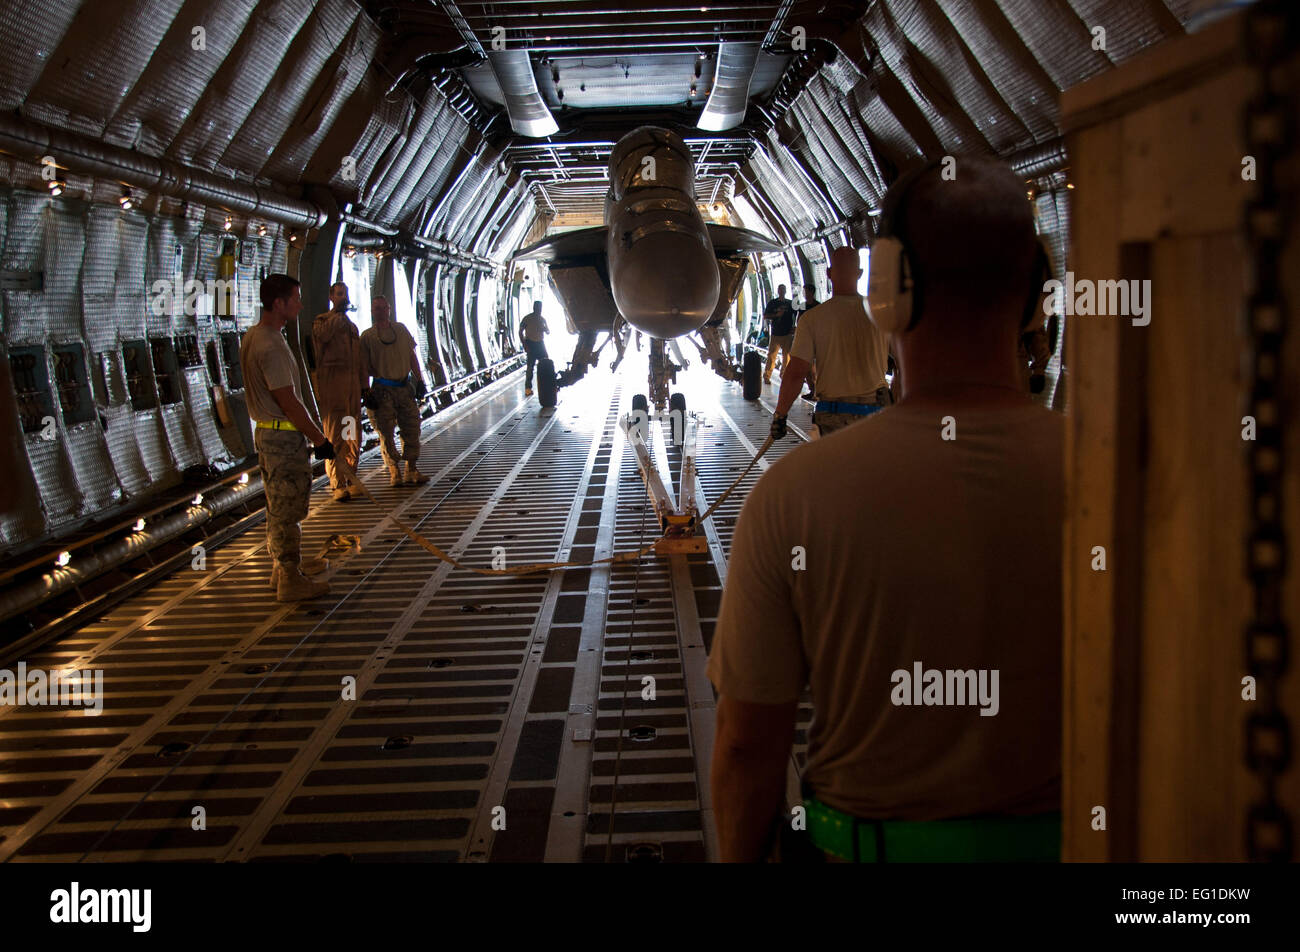 Members of the 451st Expeditionary Logistics Readiness Squadron aerial port flight and 22nd Airlift Squadron prepare to load a U.S. Navy F/A-18 Super Hornet fighter aircraft onto a U.S. Air Force C-5 Galaxy cargo aircraft on Kandahar Airfield, Afghanistan, Aug. 18, 2011. This marked the first time ever that a U.S. fighter jet has been loaded into a cargo aircraft for transport back to the United States. After months of coordination and planning, senior leaders at the Navy's Naval Air Forces and the Air Force's Air Mobility Command approved a plan to transport the aircraft back to its home stat Stock Photo